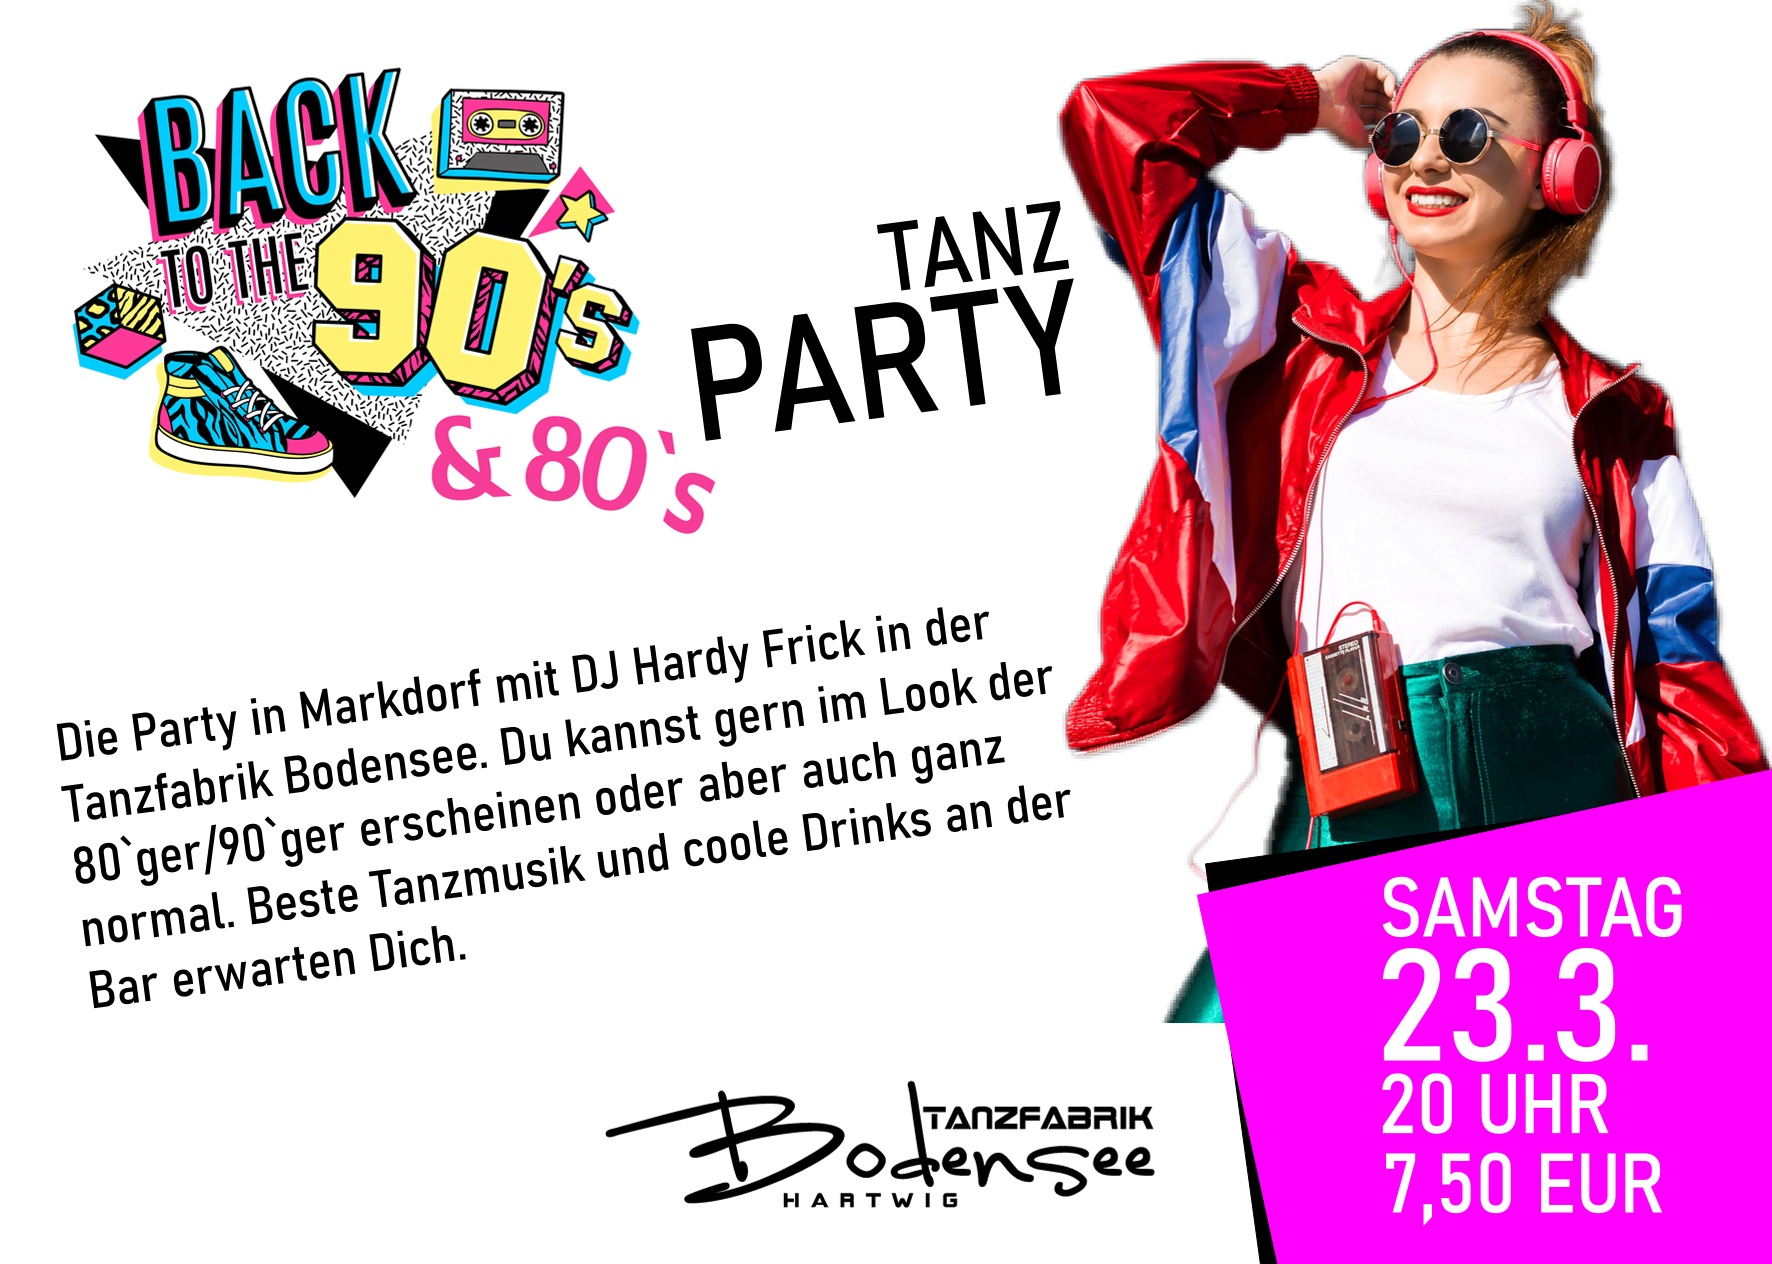 80ger/90ger Tanzparty am Bodensee